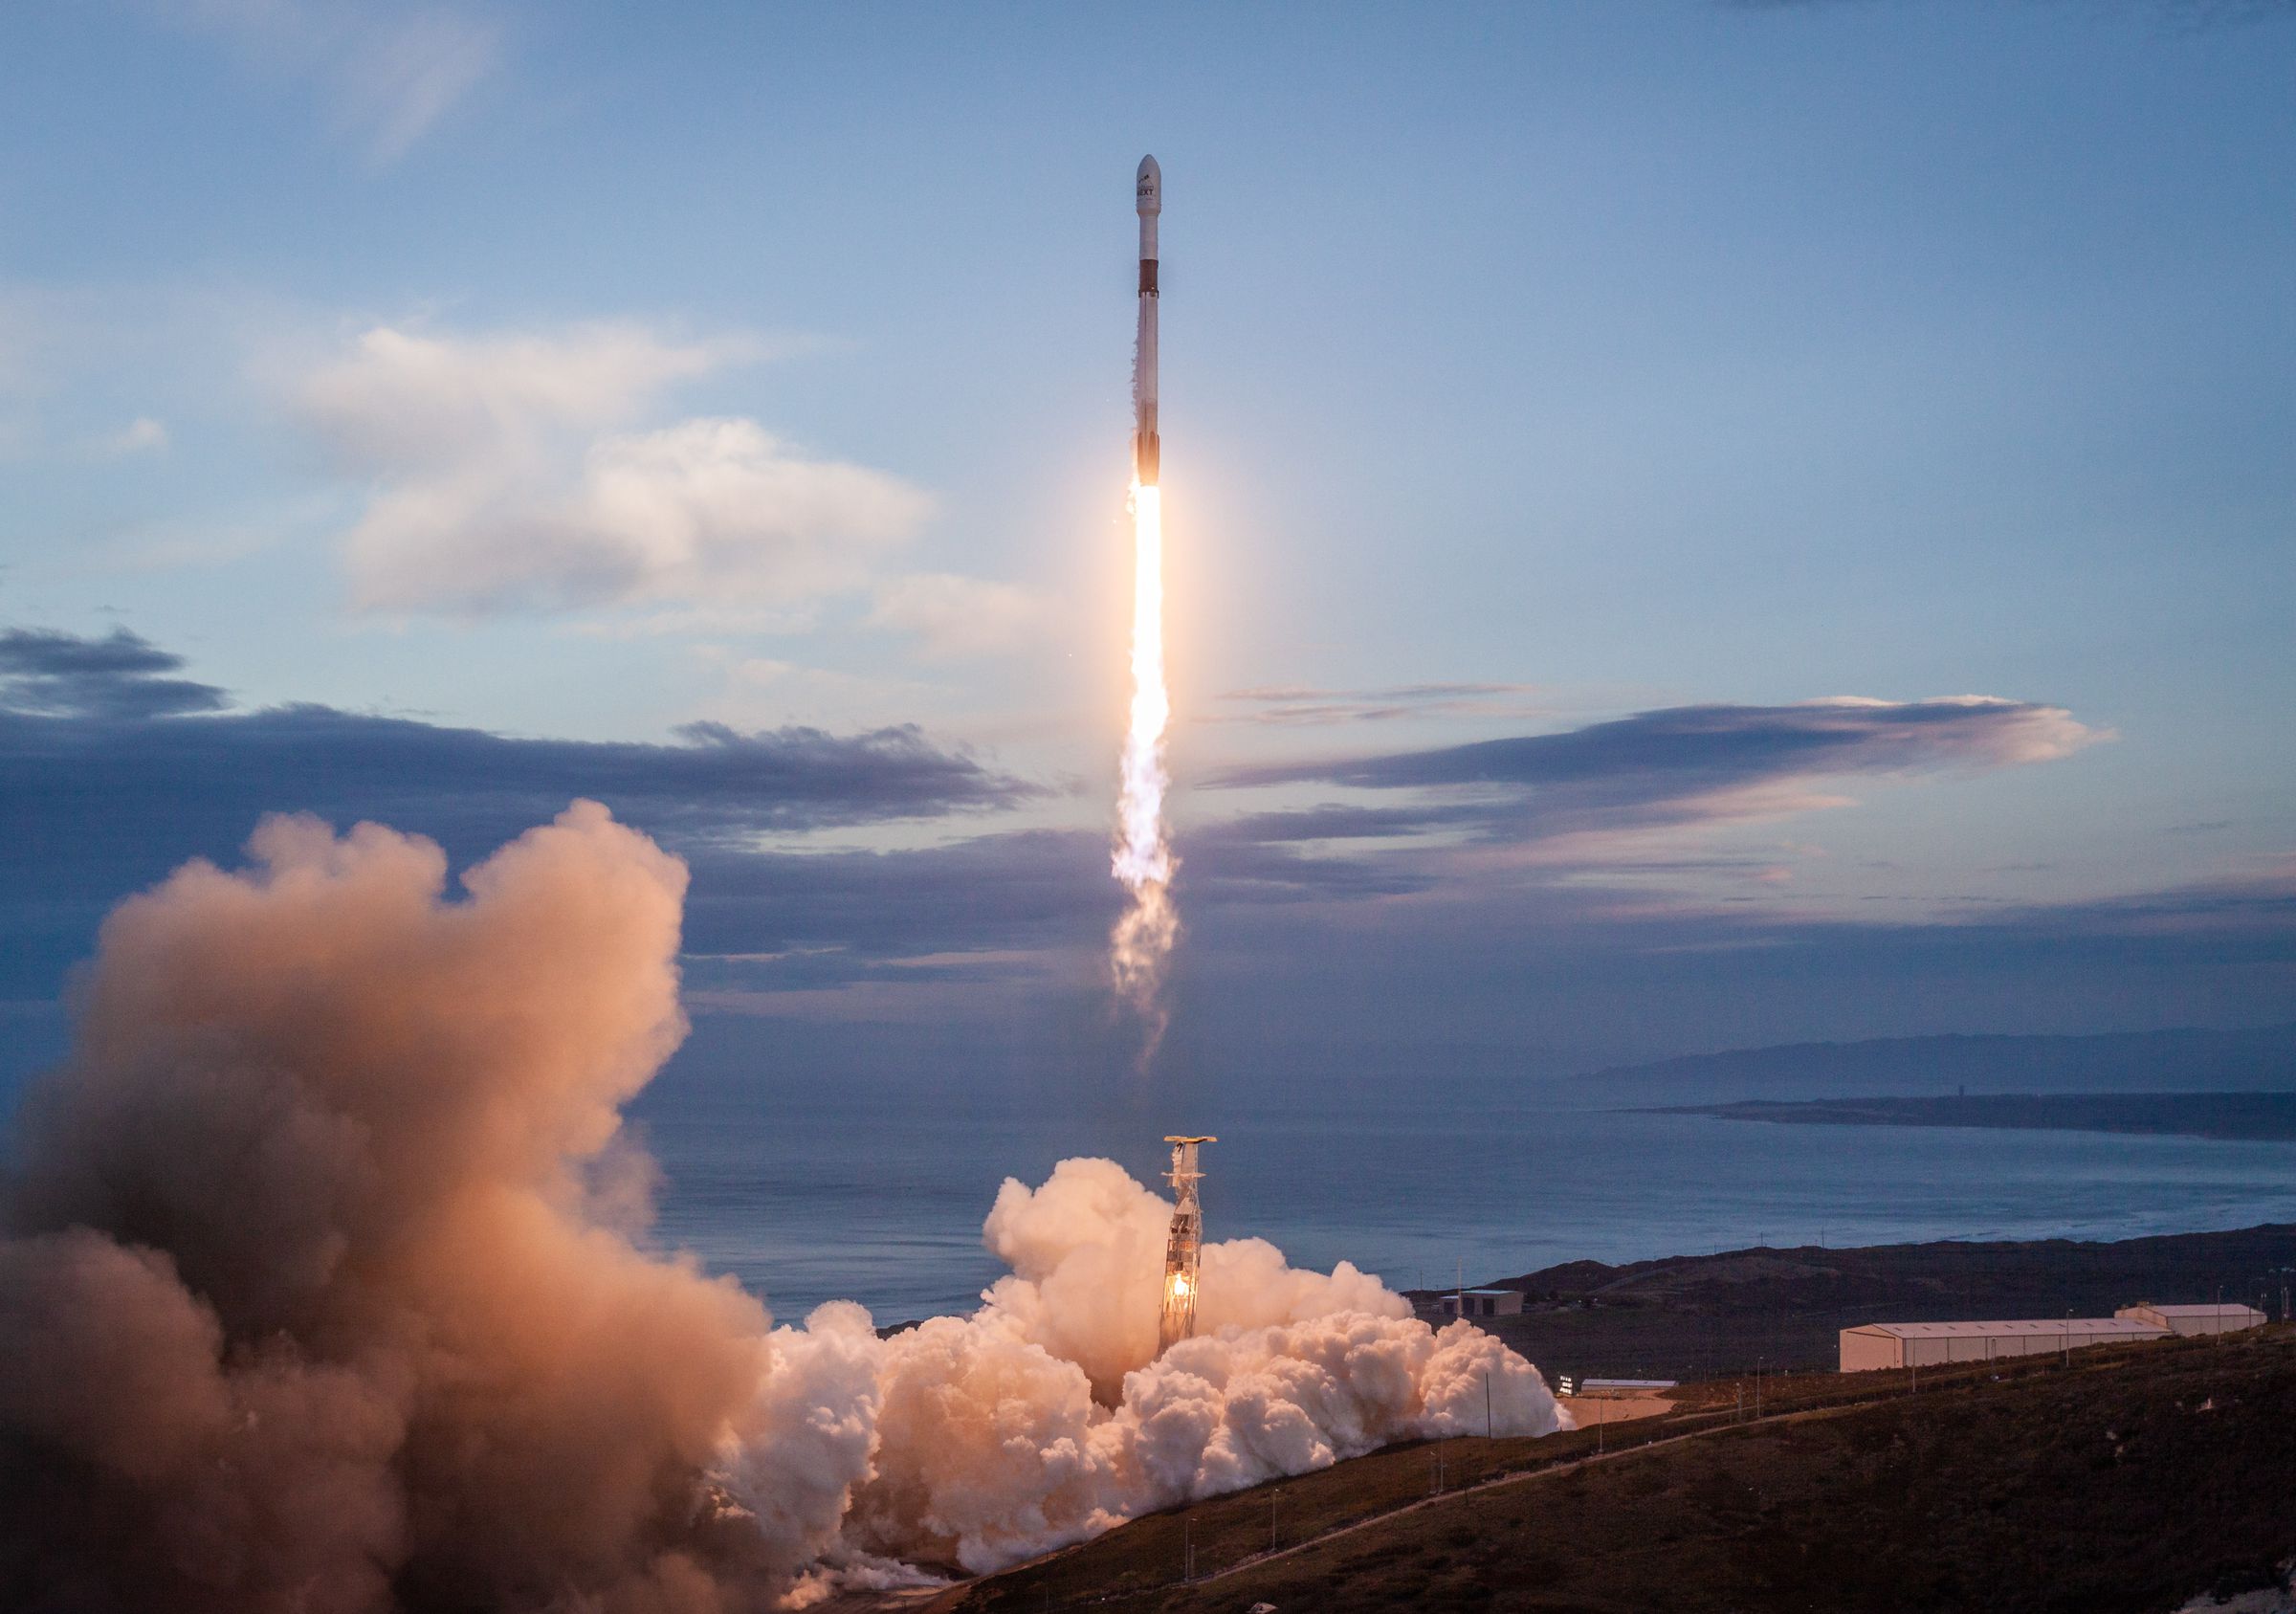 The SpaceX Falcon 9 rocket that launched the final batch of Iridium NEXT satellites in January